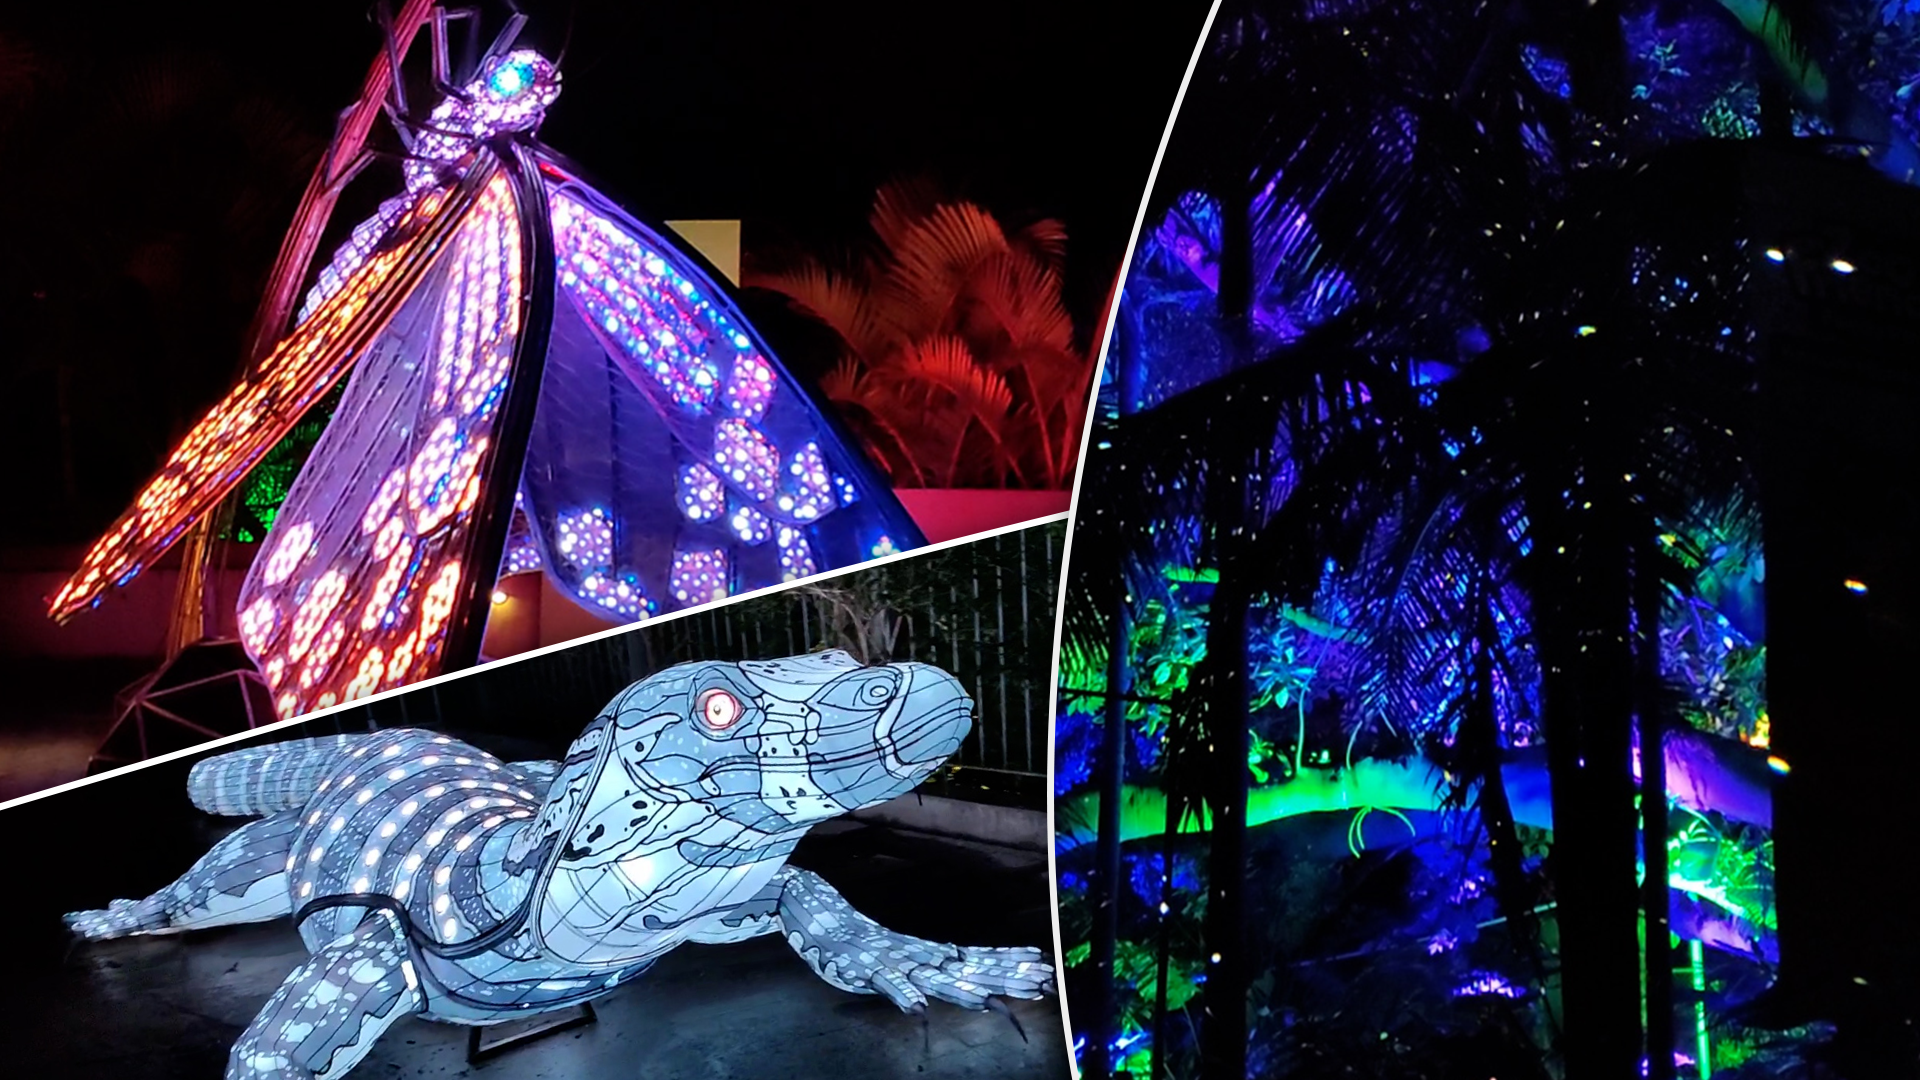 Wild Lights at Taronga Zoo is back as part of Vivid Sydney in 2022